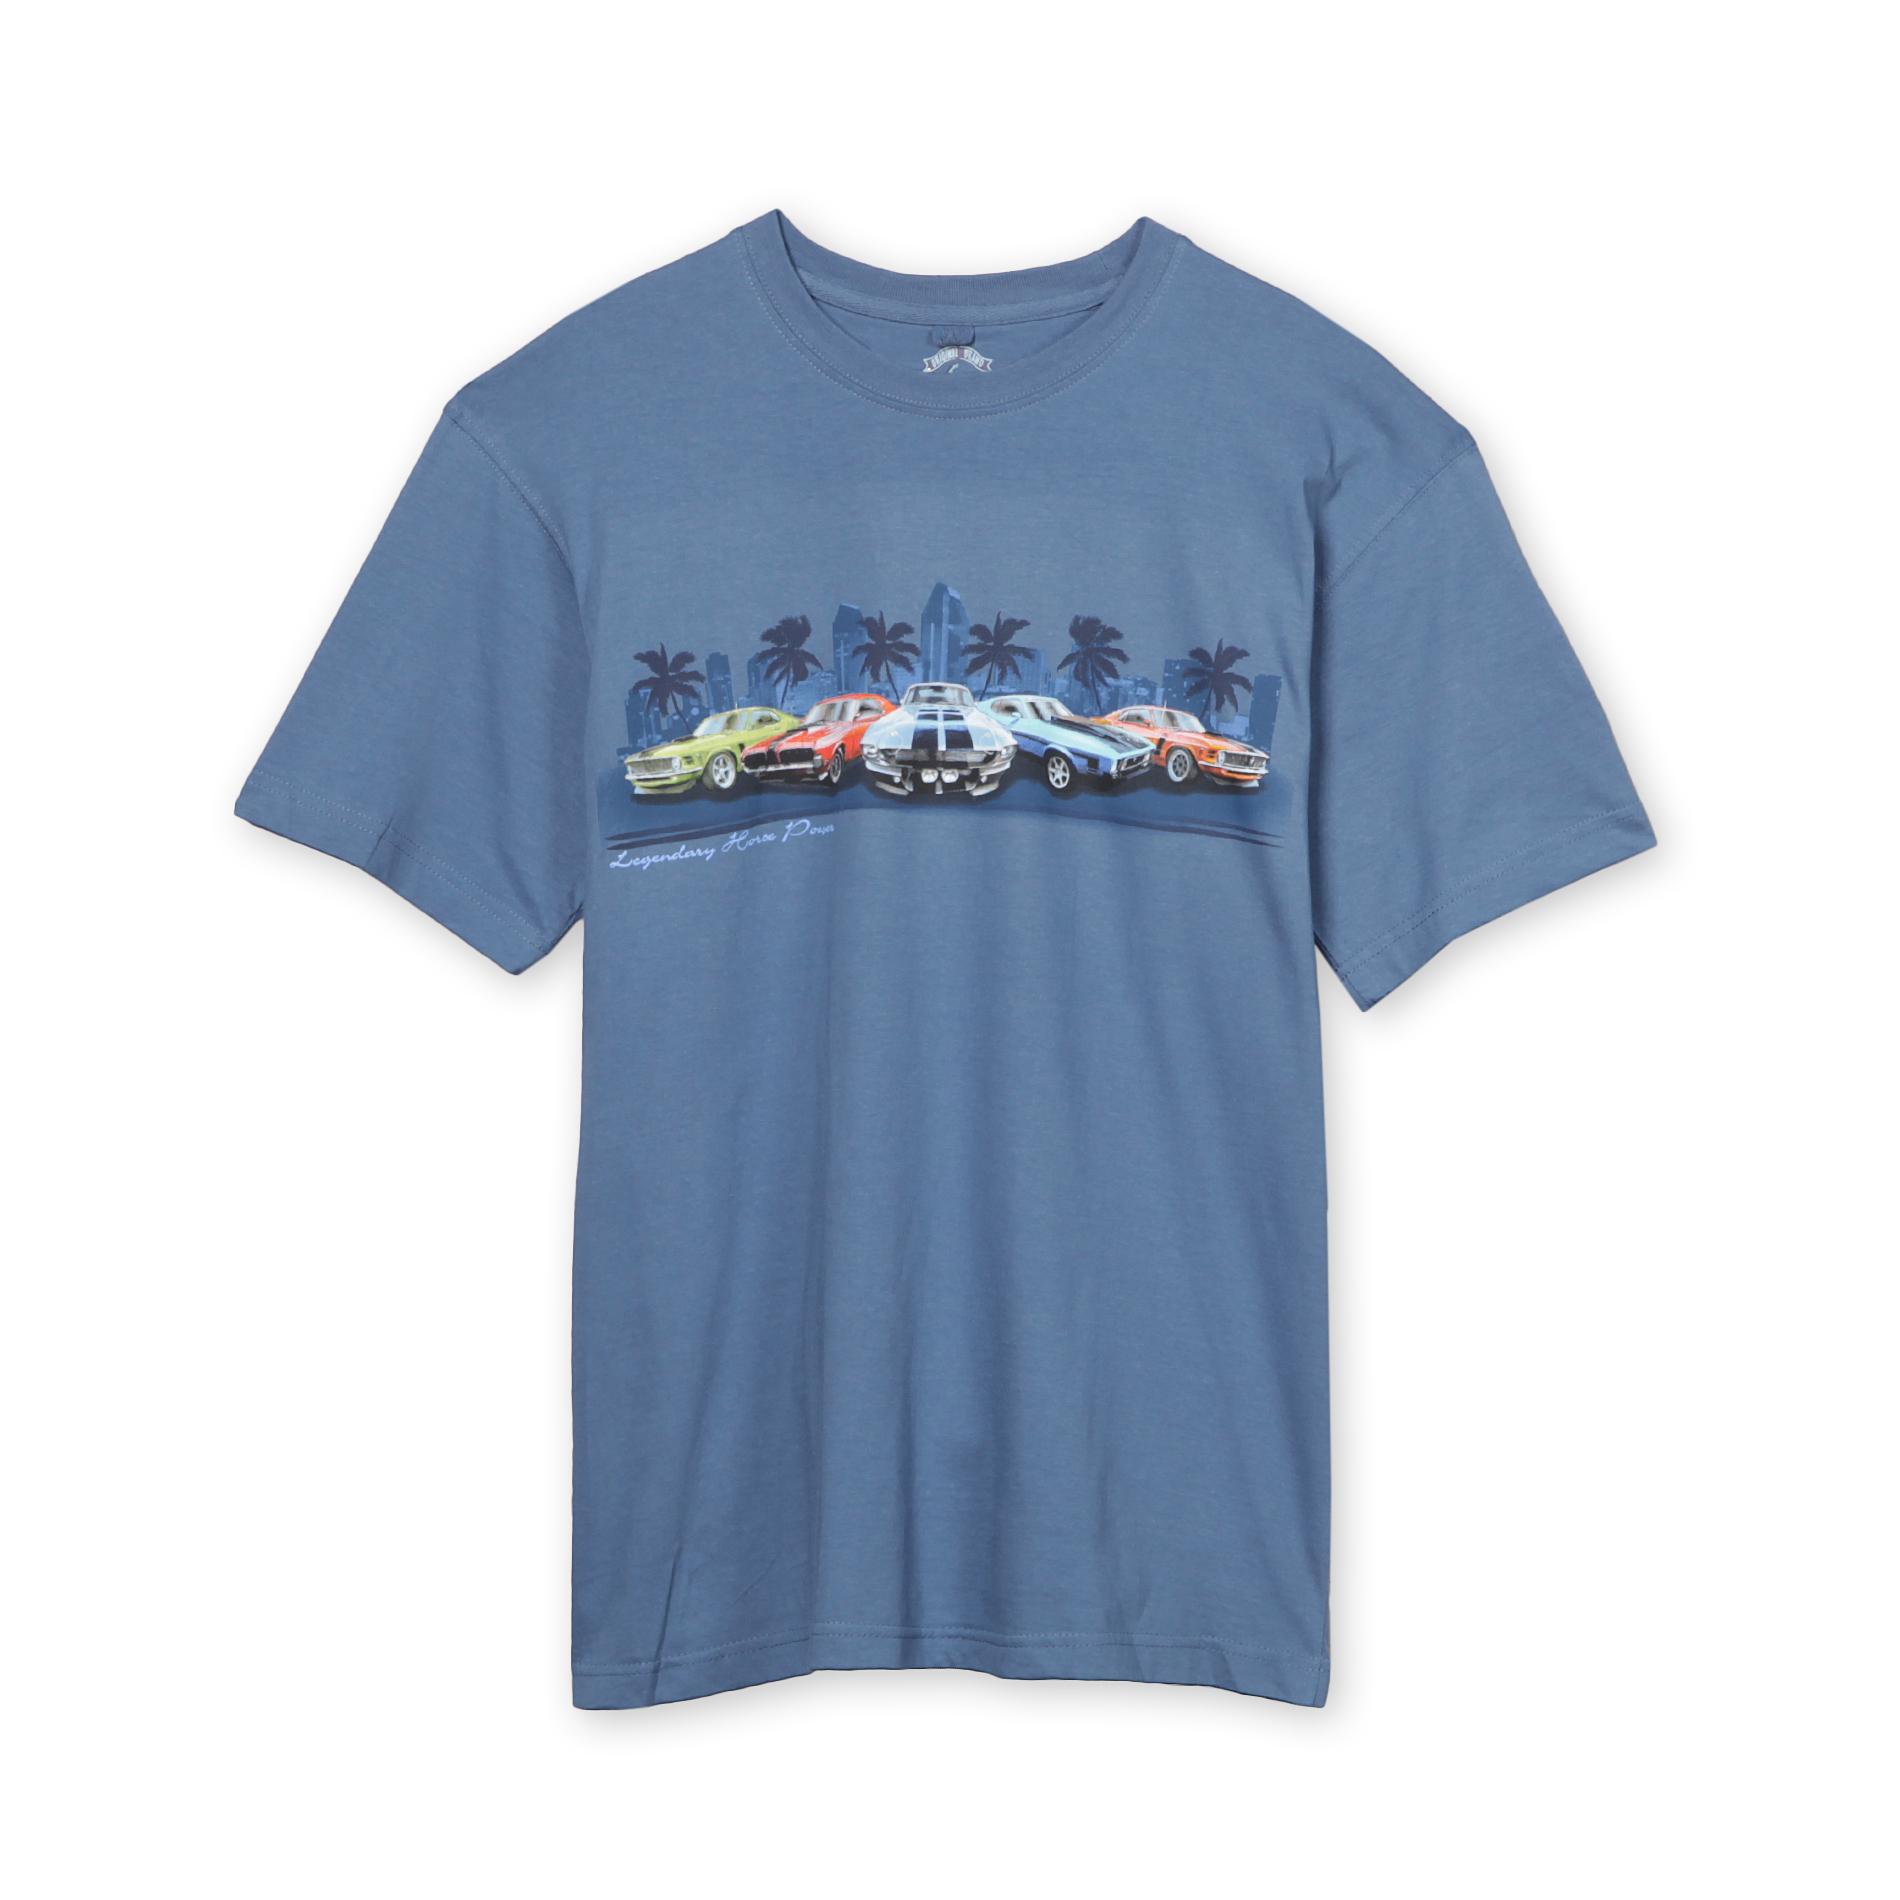 Outdoor Life Men's Big & Tall Graphic T-Shirt - Classic Cars by Out of Bounds